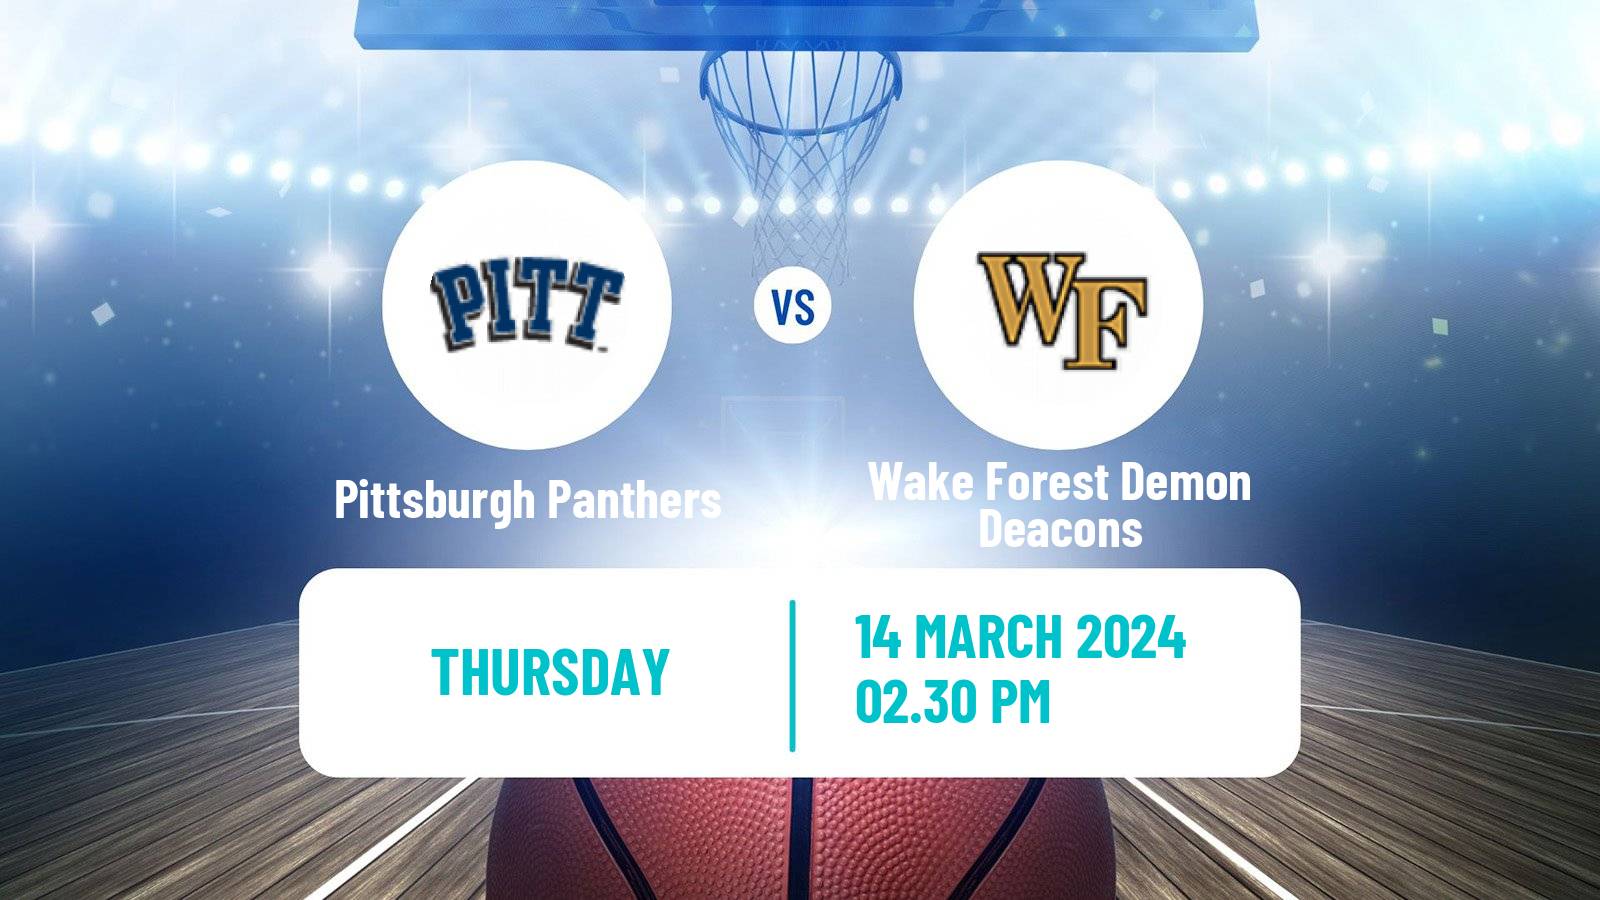 Basketball NCAA College Basketball Pittsburgh Panthers - Wake Forest Demon Deacons